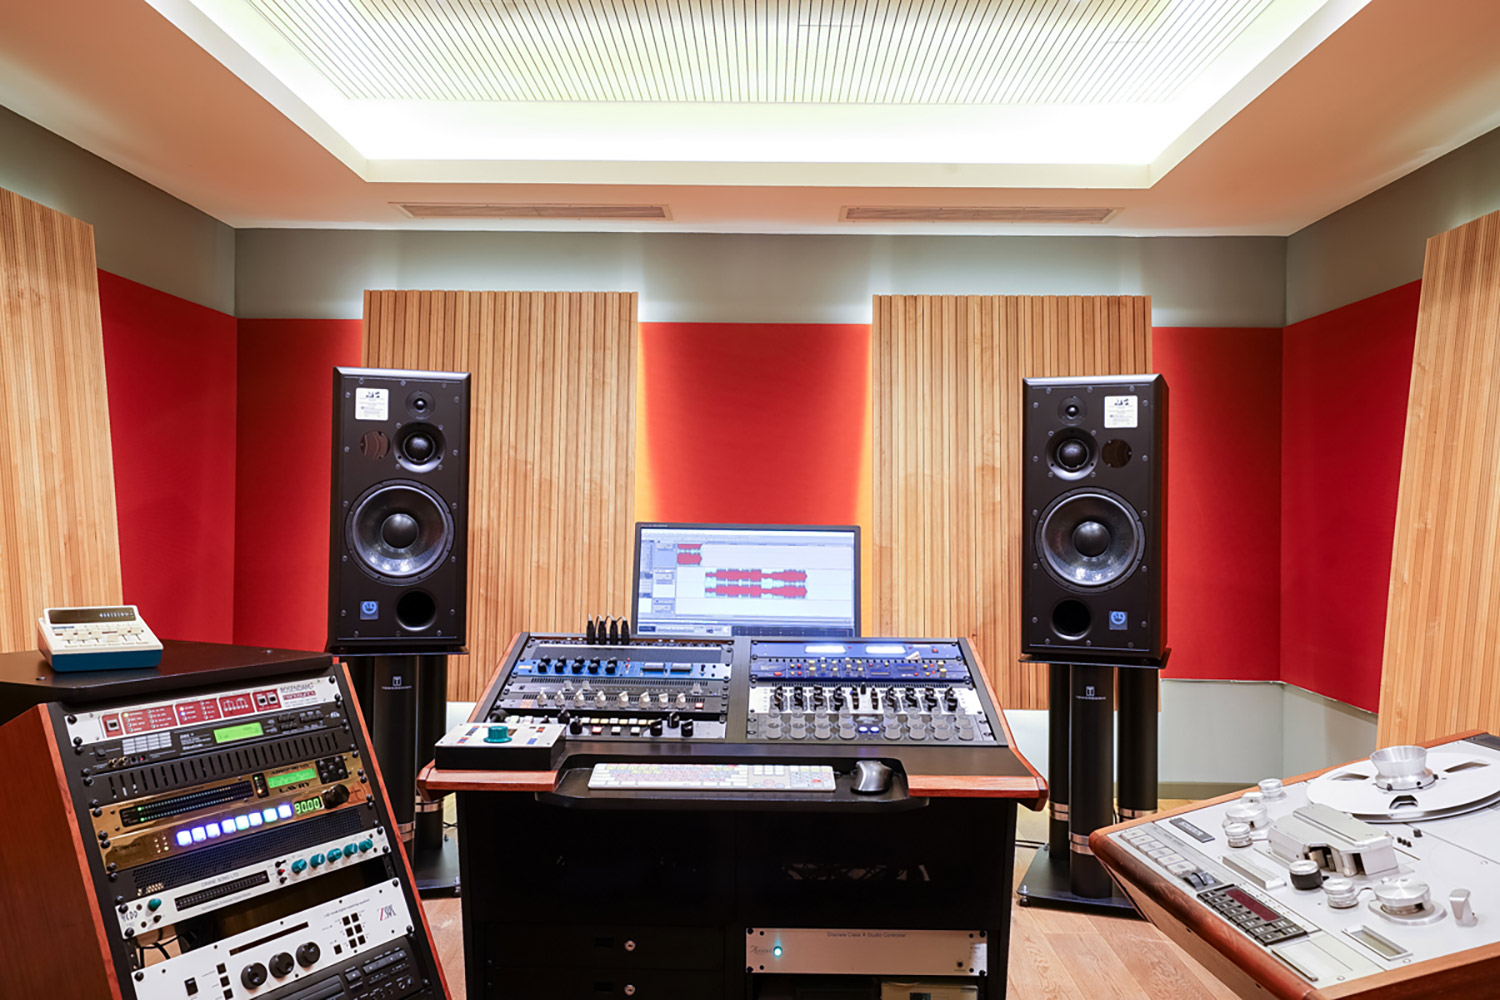 Sunshine Music has provided the Austrian music community with impeccable creative mastering and recording services since 1995. Designed and tuned by WSDG, Sunshine just upgraded their speakers to ATC Pro models. Mastering 1.